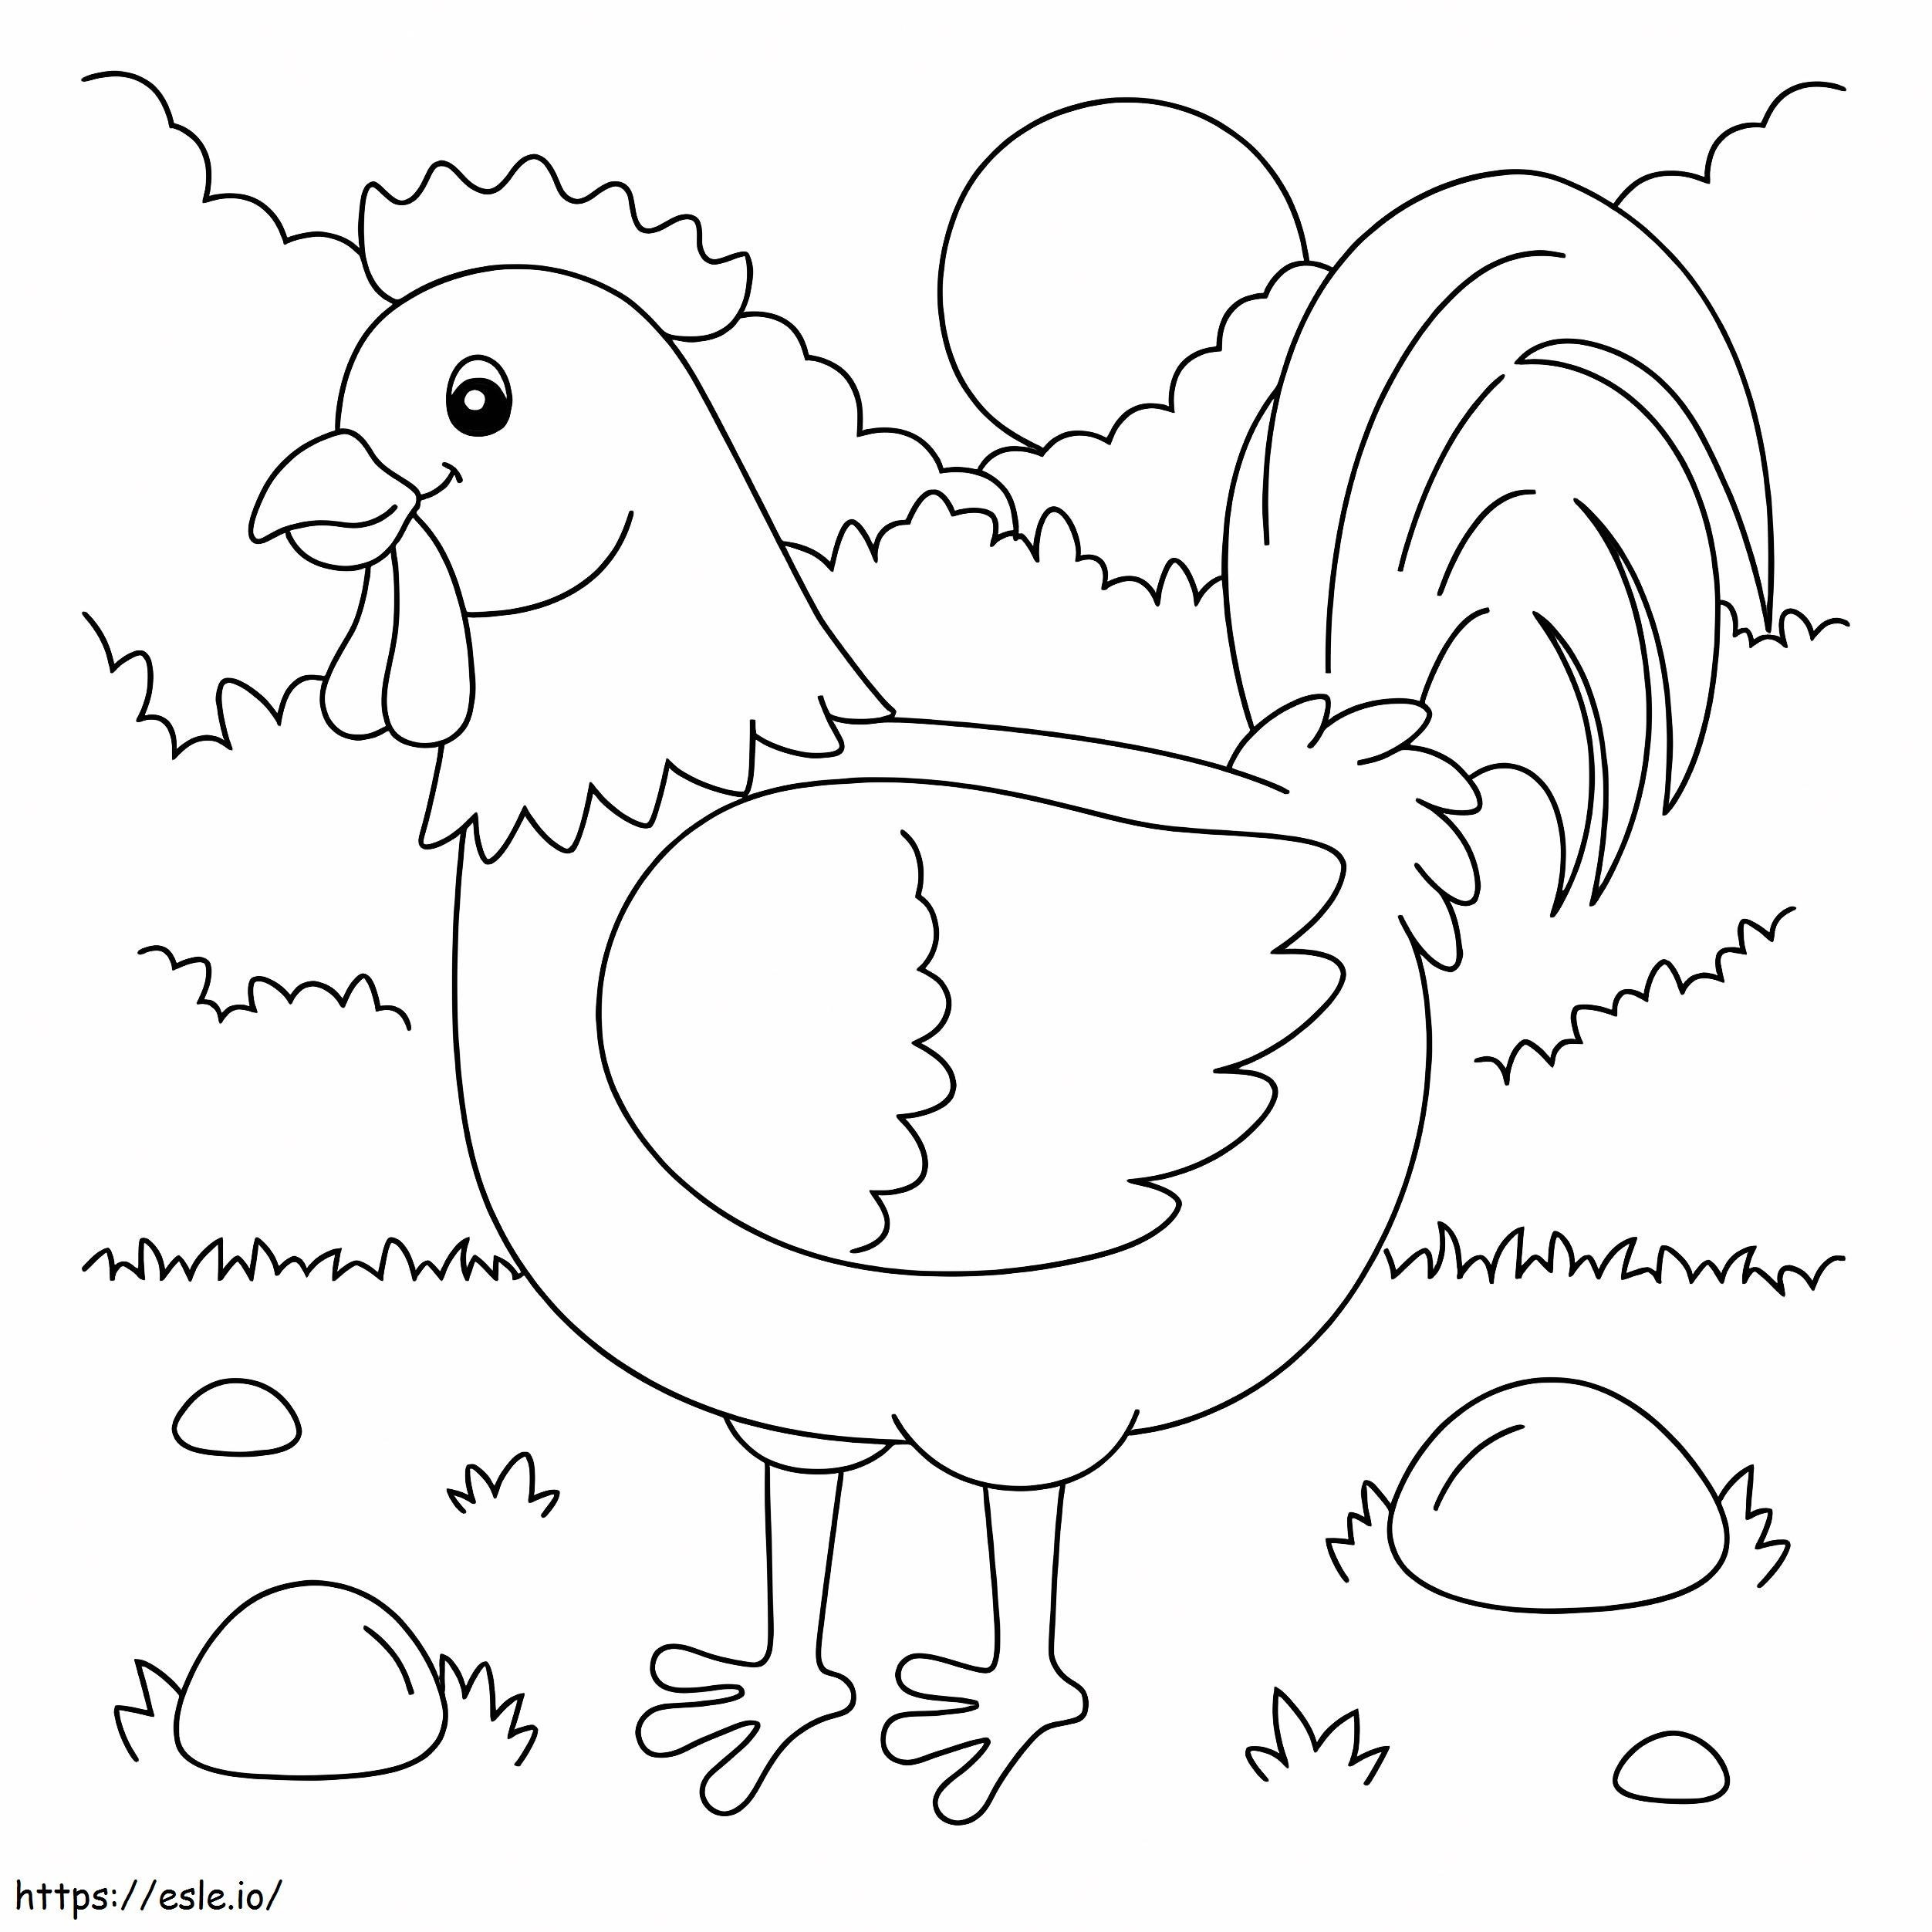 Fat Rooster coloring page